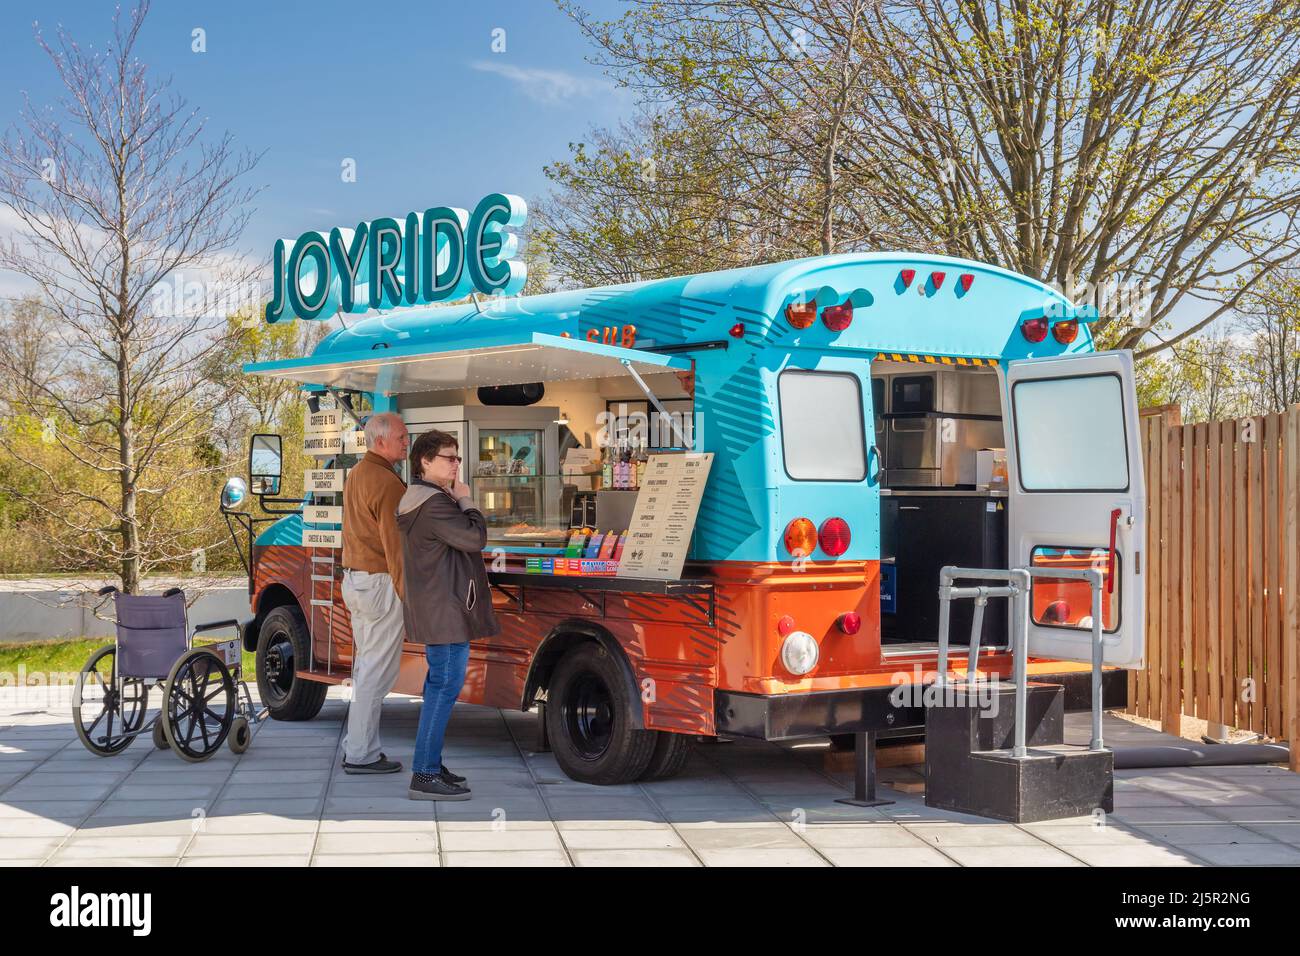 ALMERE, THE NETHERLANDS - APRIL 21, 2022: Vintage food truck with two people ordering on the Floriade Expo 2022 in Almere, The Netherlands Stock Photo